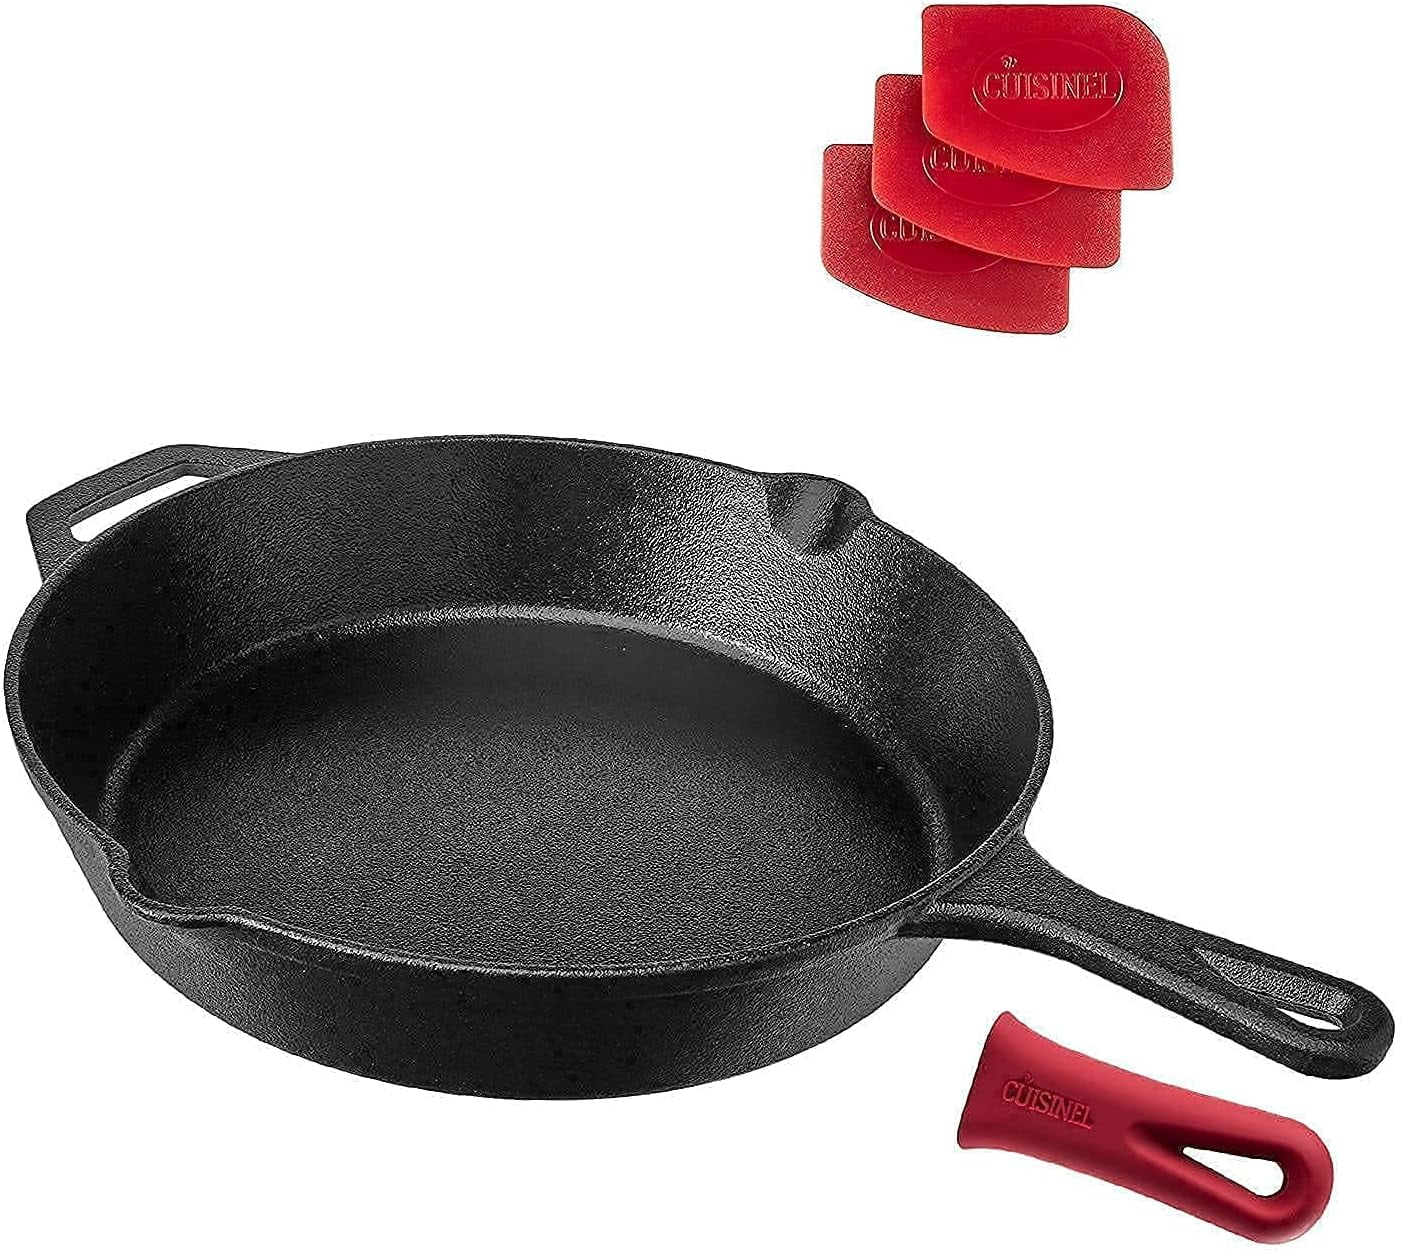 Lodge Cast Iron Skillet with Red Silicone Hot Handle Holder, 12-inch